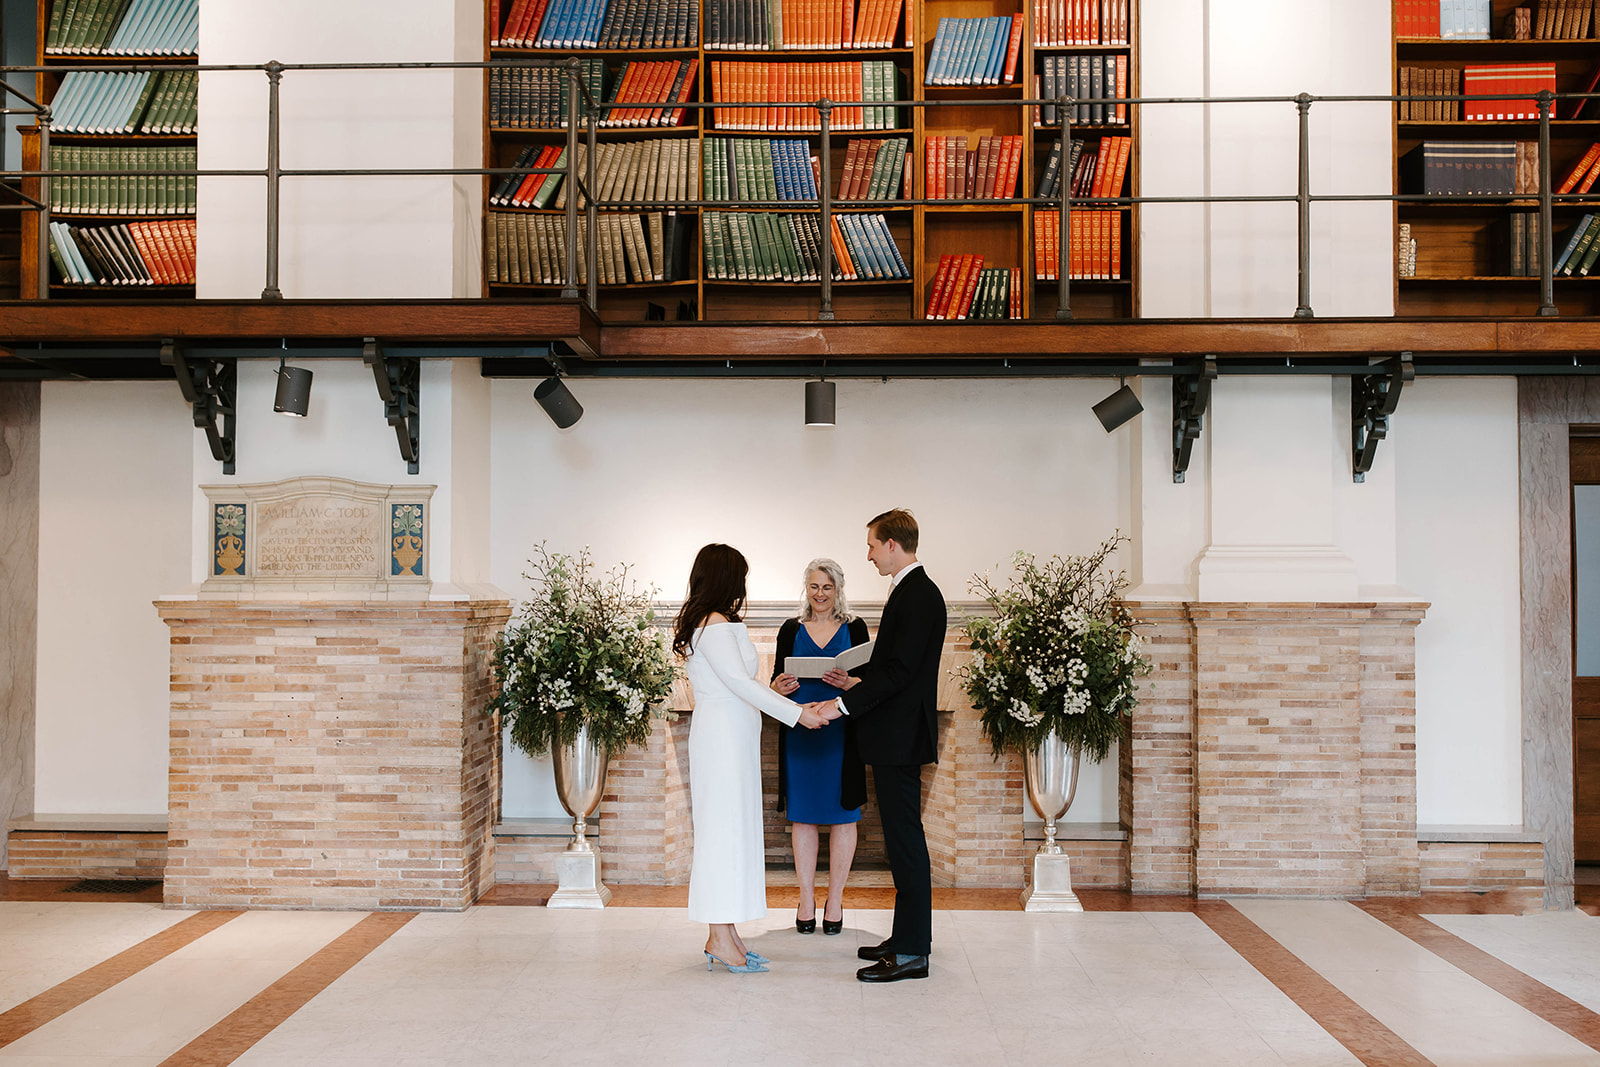 Stunning bride and groom pose together after their dreamy Boston public library wedding